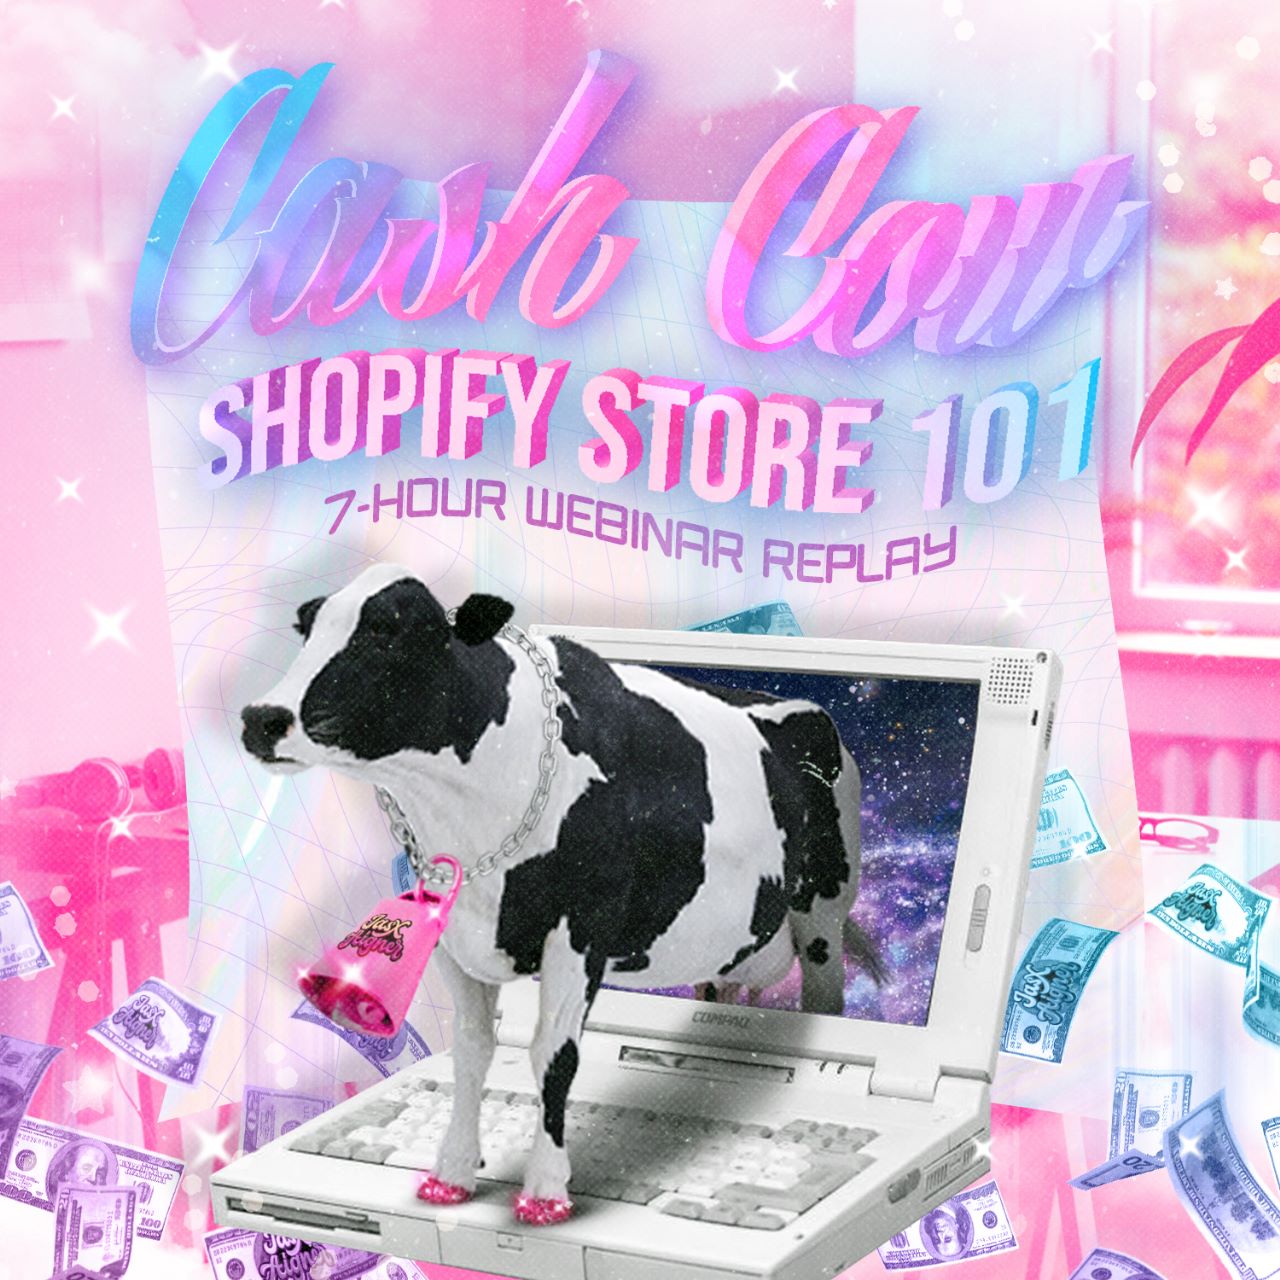 Building A Cash Cow Shopify Store! 7+ Hours Webinar Replay